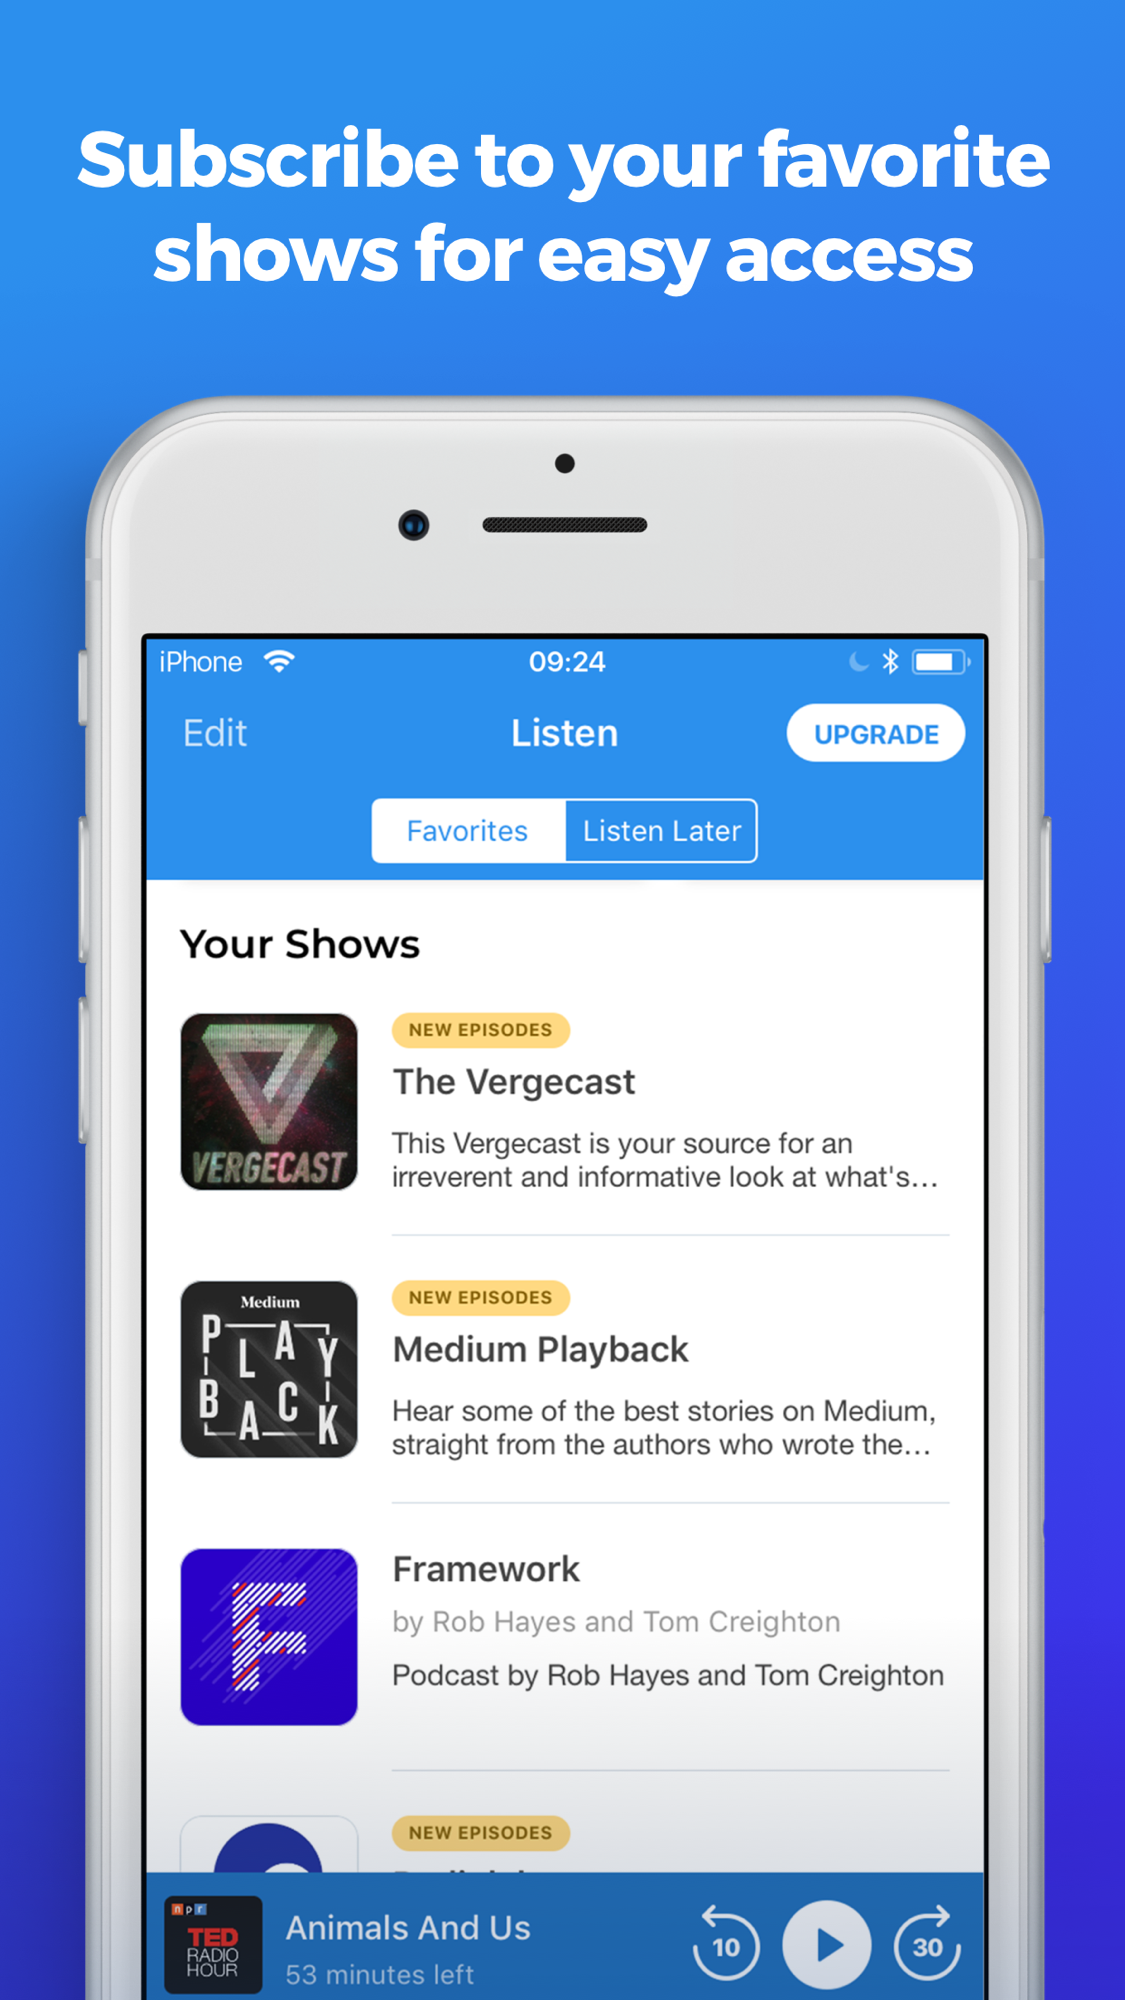 The Podcast App  Featured Image for Version 